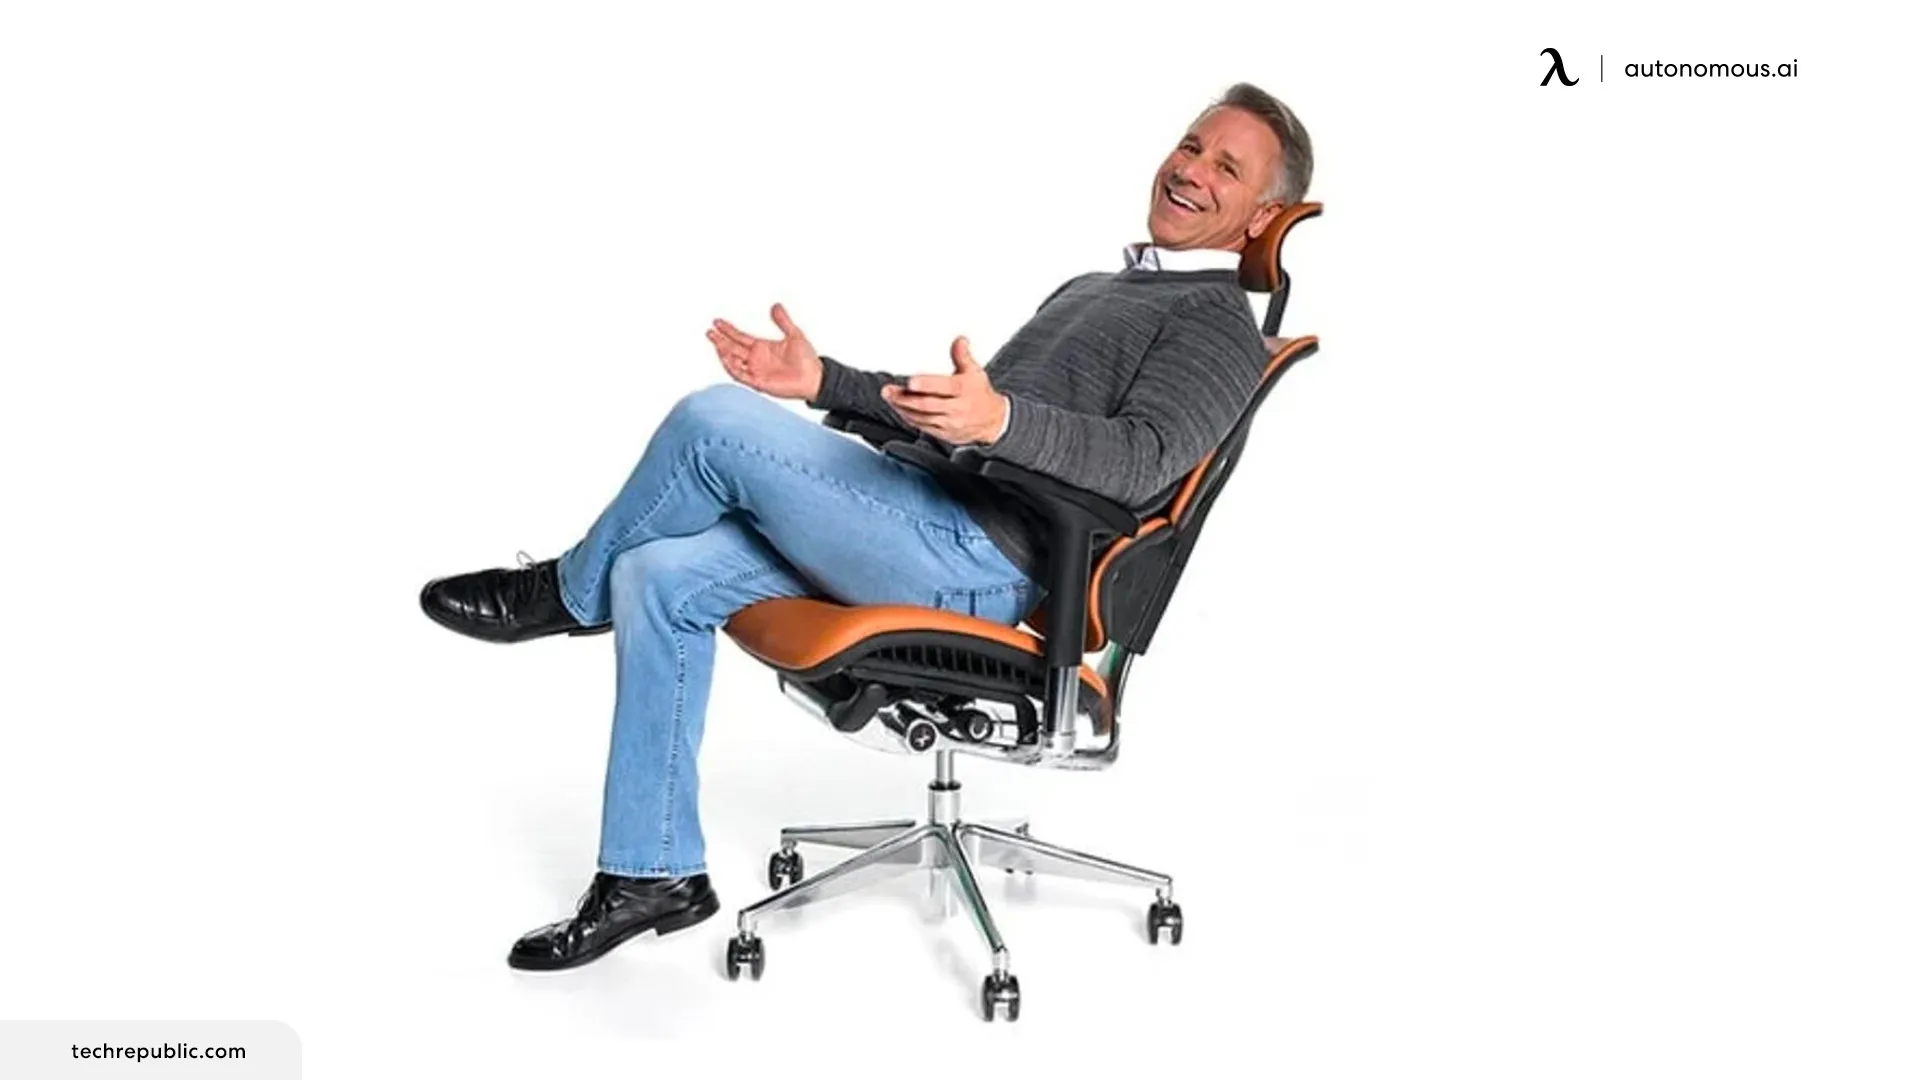 What Are the Benefits of Using Heat Chairs?